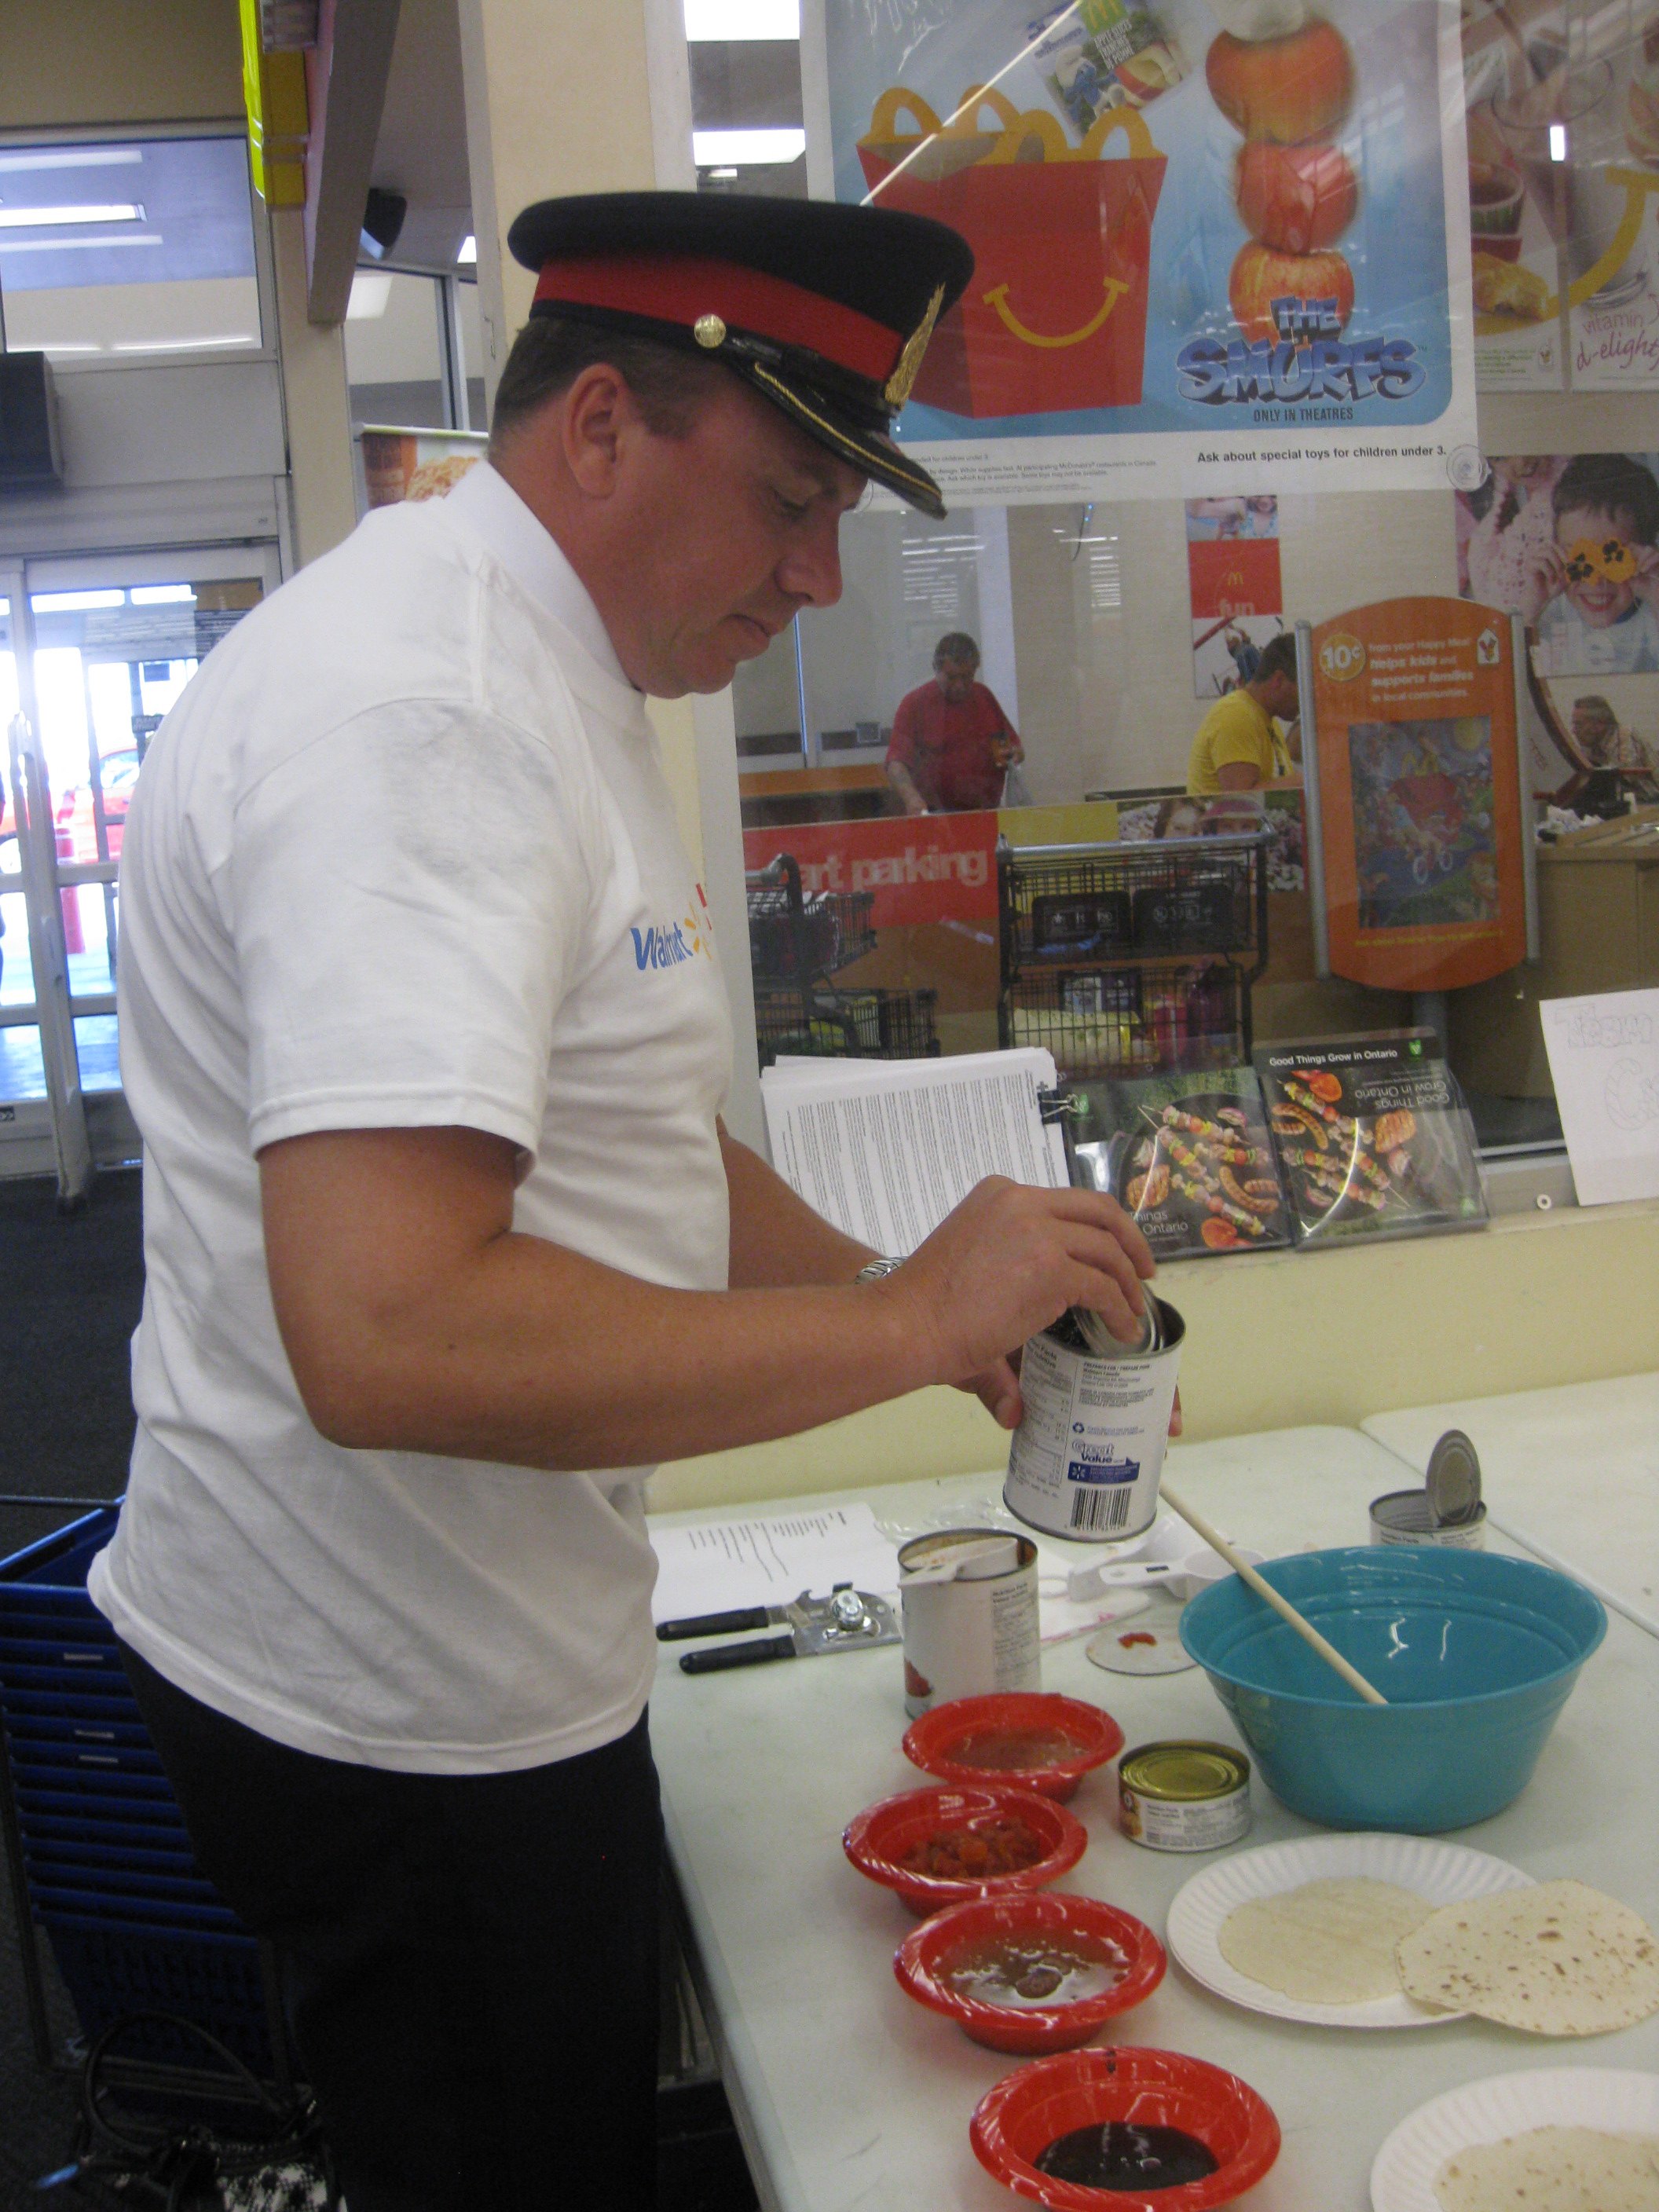 Inspector Steve Goodine from the London Police competes in disaster dining challenge